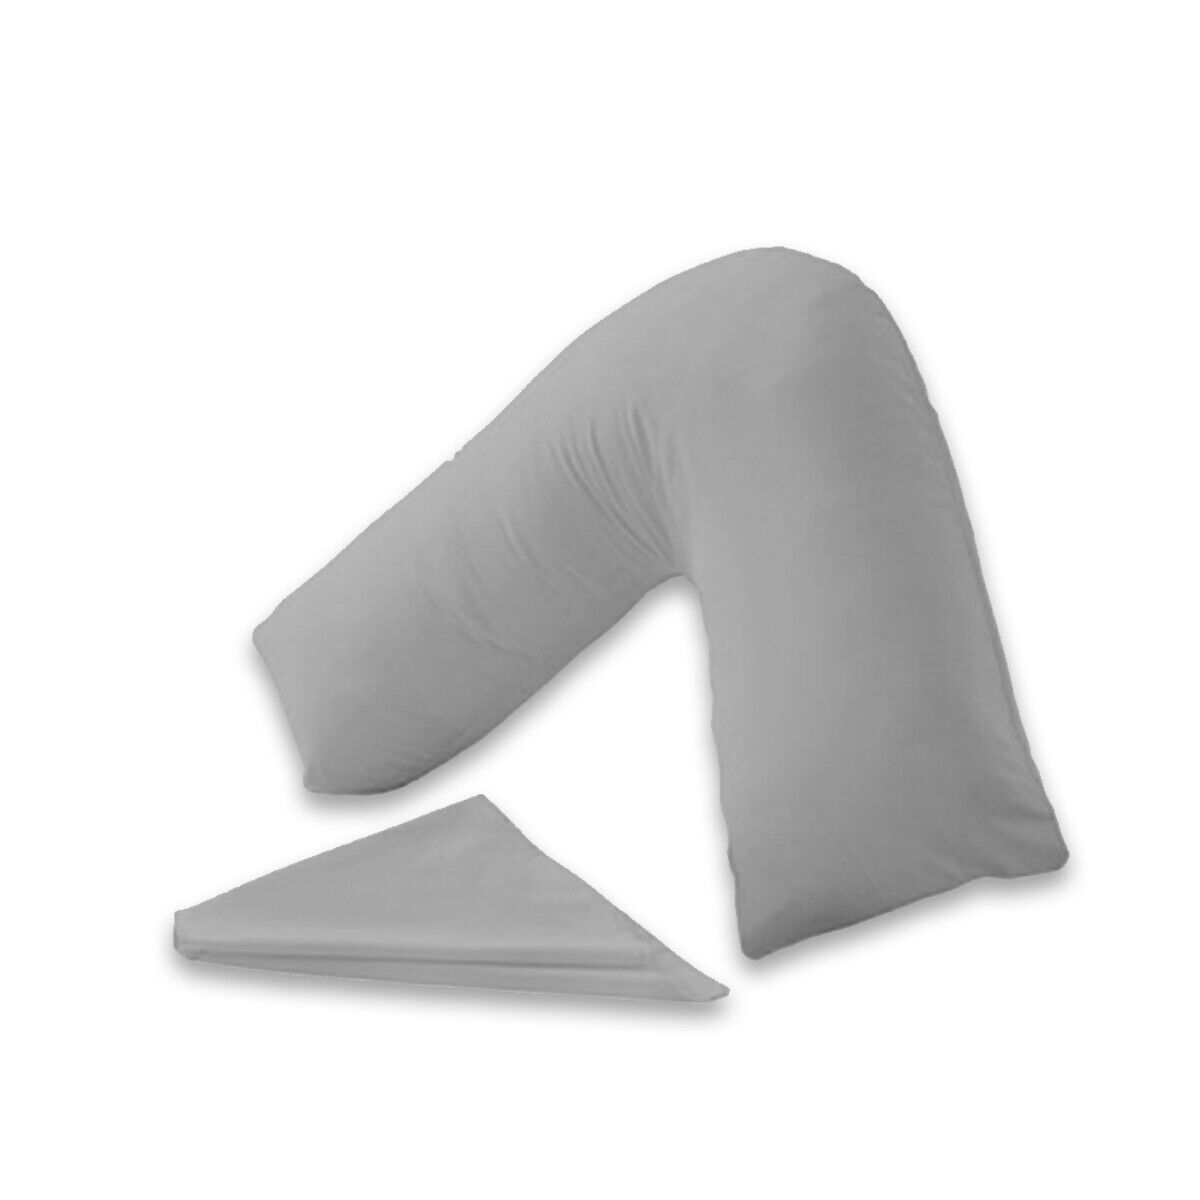 V Shaped Poly Cotton Pillow Case Orthopedic Pregnancy Back & Neck Support Cover ⭐⭐⭐⭐⭐